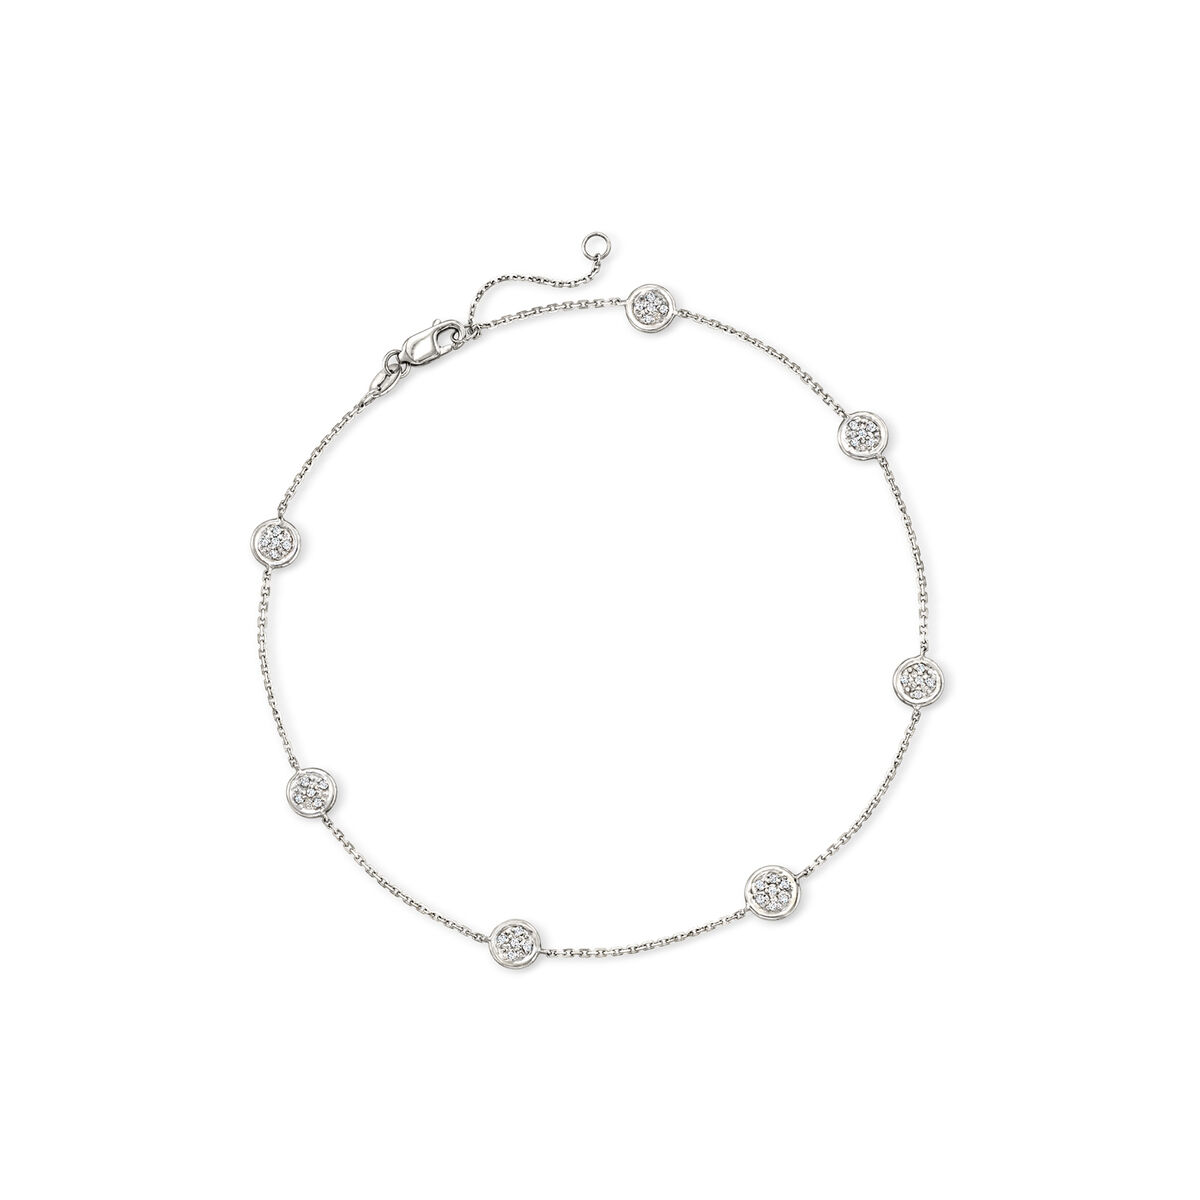 25 ct. t.w. Pave Diamond Station Anklet in 14kt White Gold. 9" | Ross-Simons